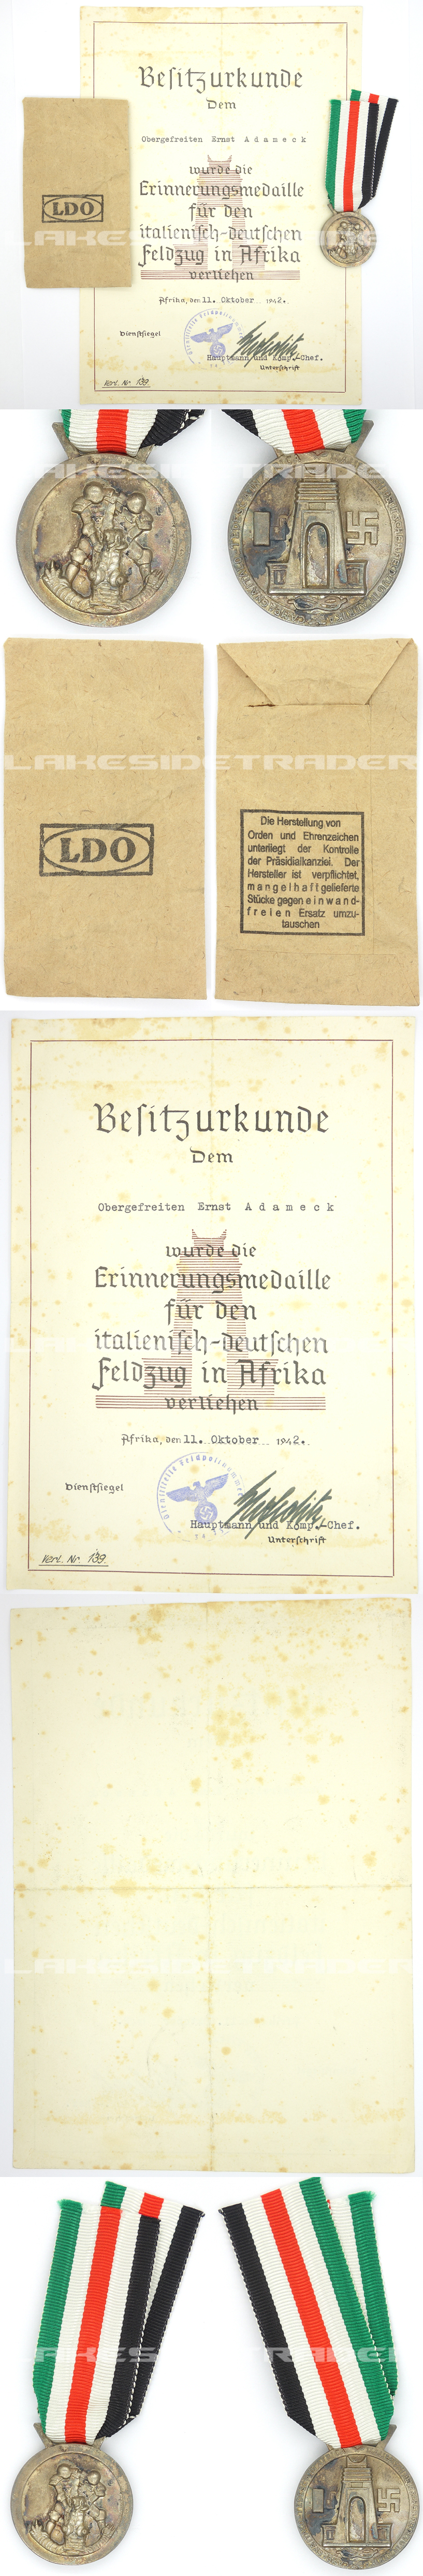 Italian-German African Campaign Medal with Packet and Award Document